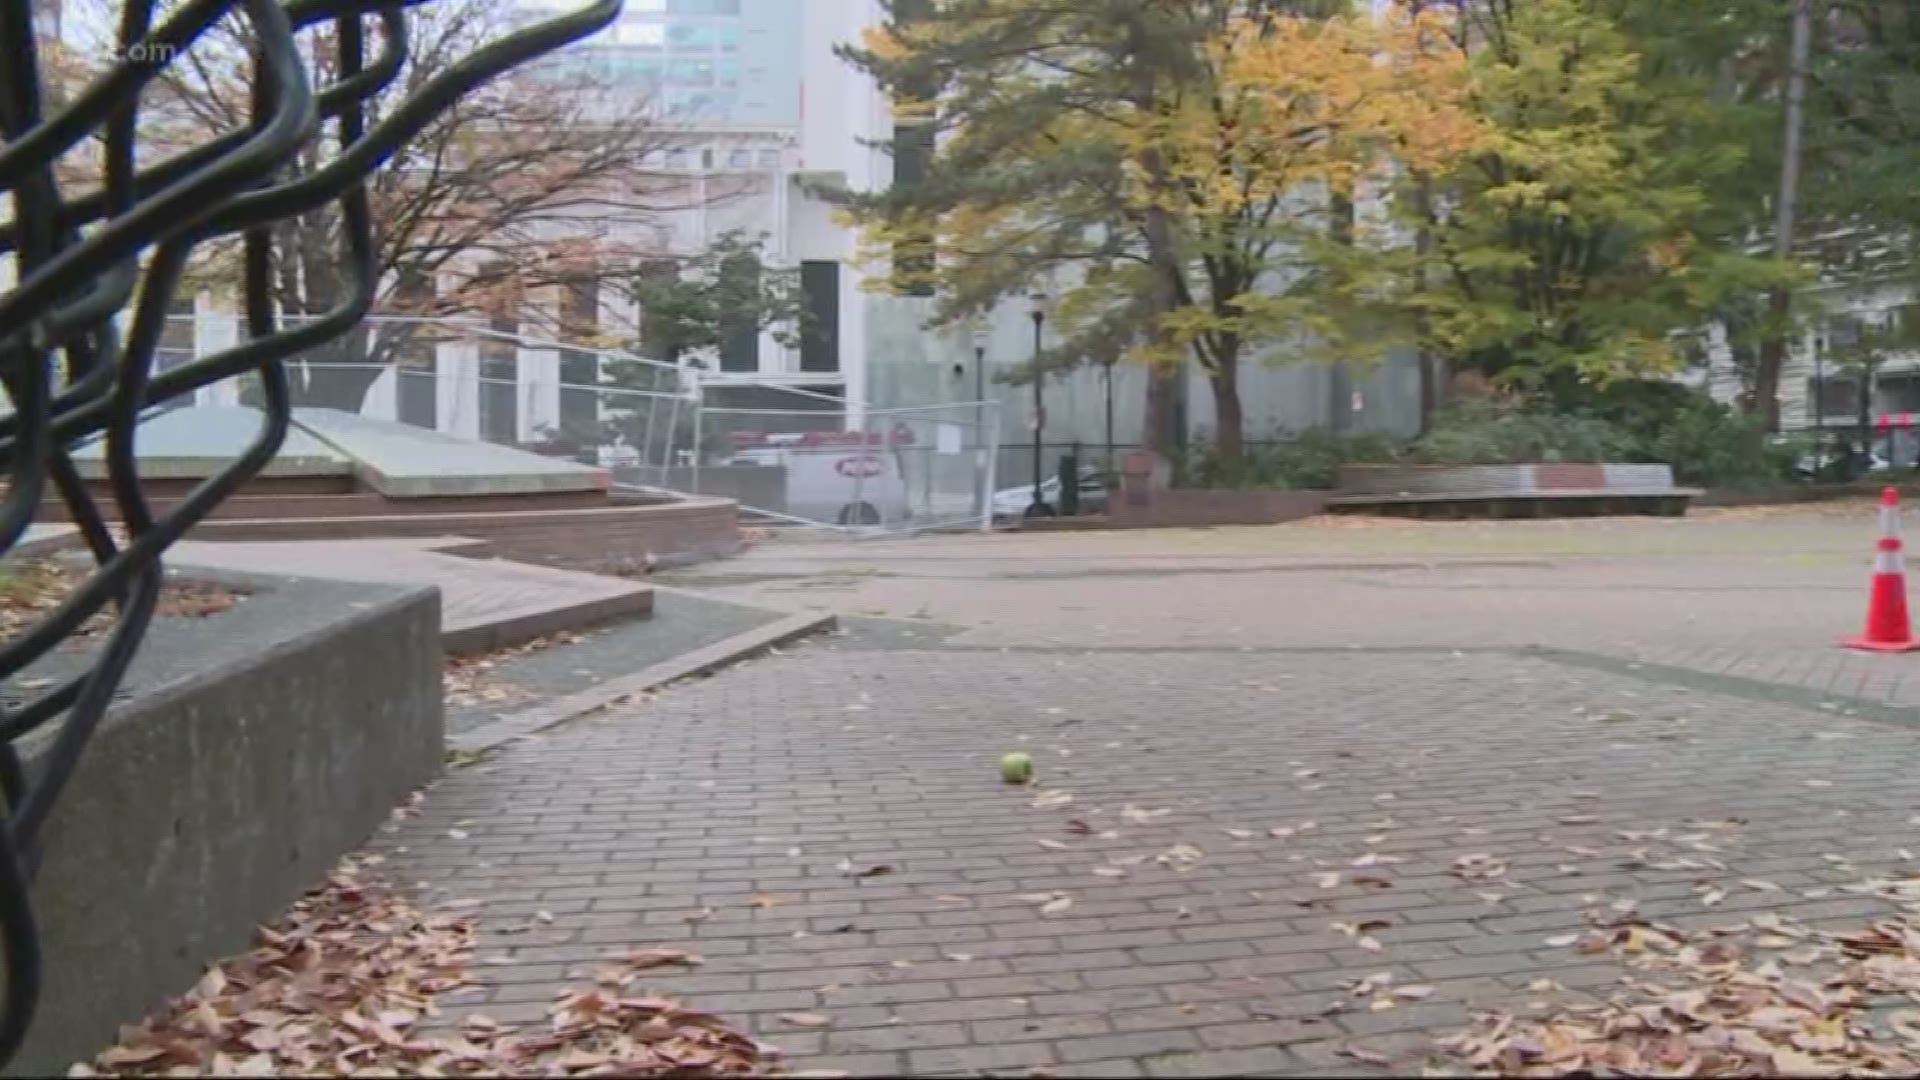 The city of Portland has taken its first step to fix O’Bryant Square. Their plans to renovate the area.